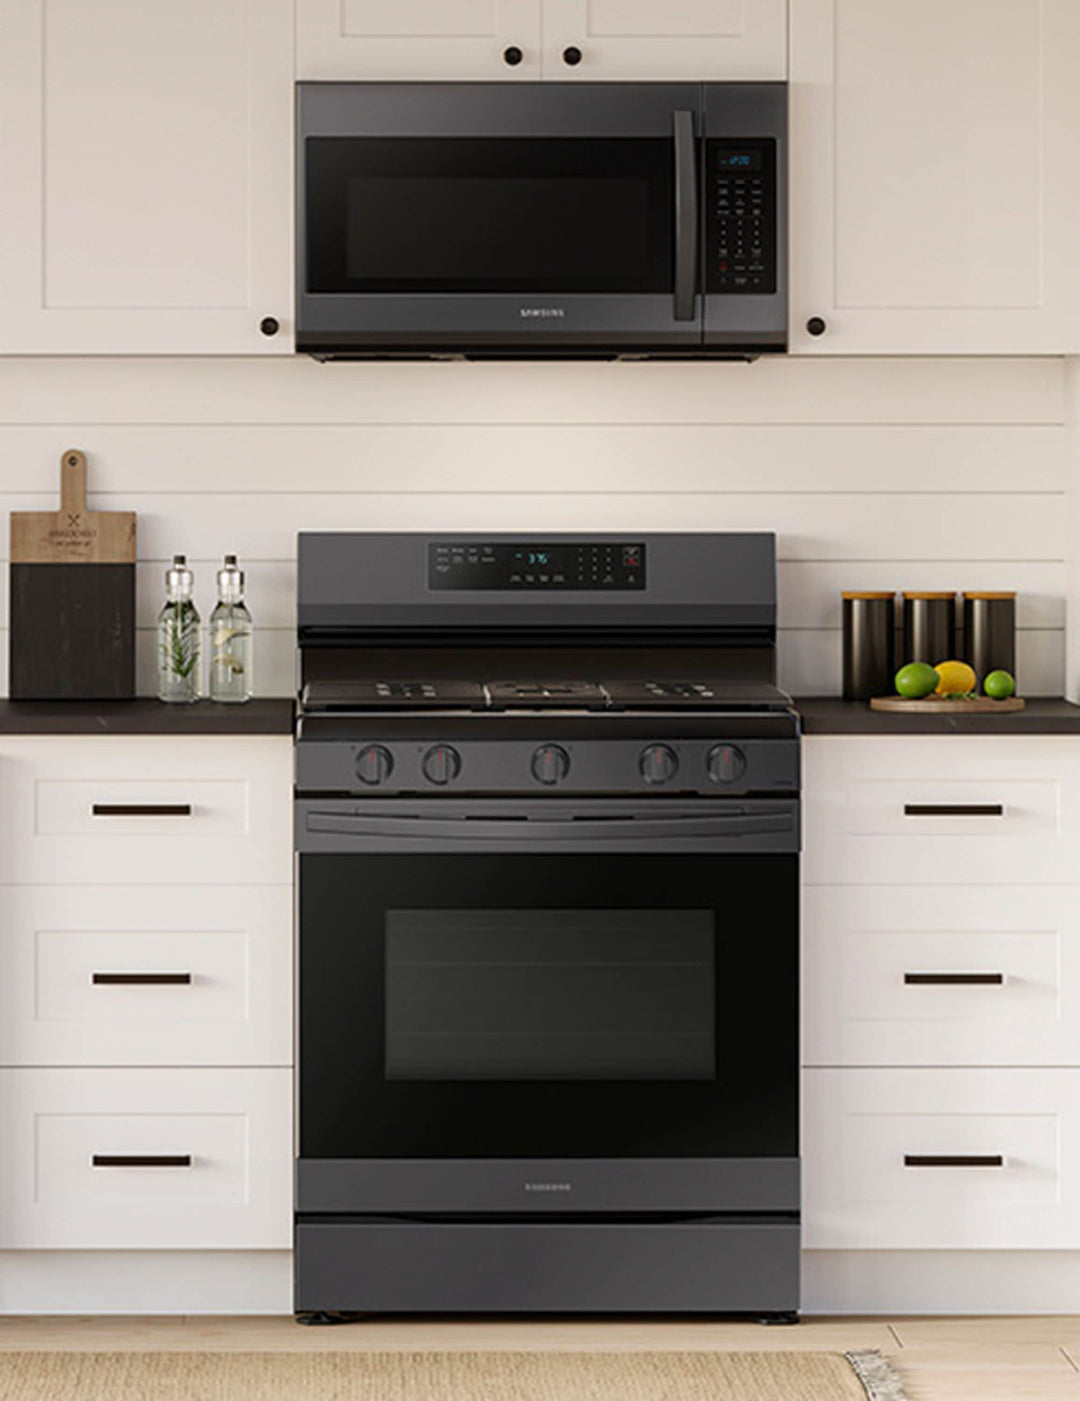 Samsung - 6.0 cu. ft. Freestanding Gas Range with WiFi, No-Preheat Air Fry & Convection - Black stainless steel_9